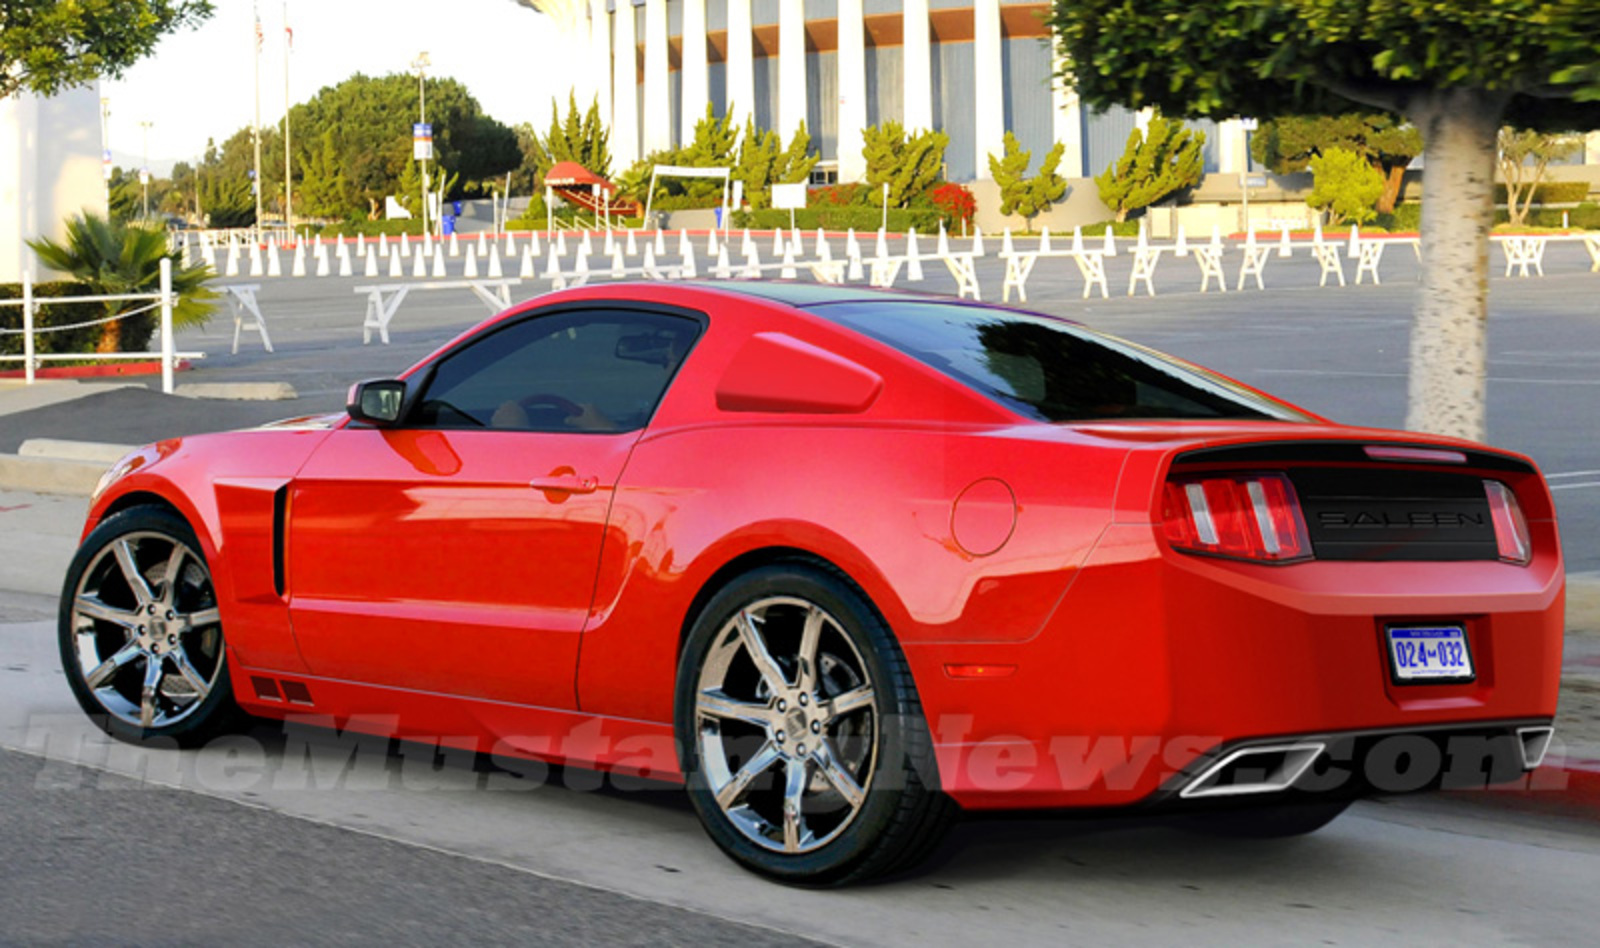 Is this the 2010 Saleen Mustang?